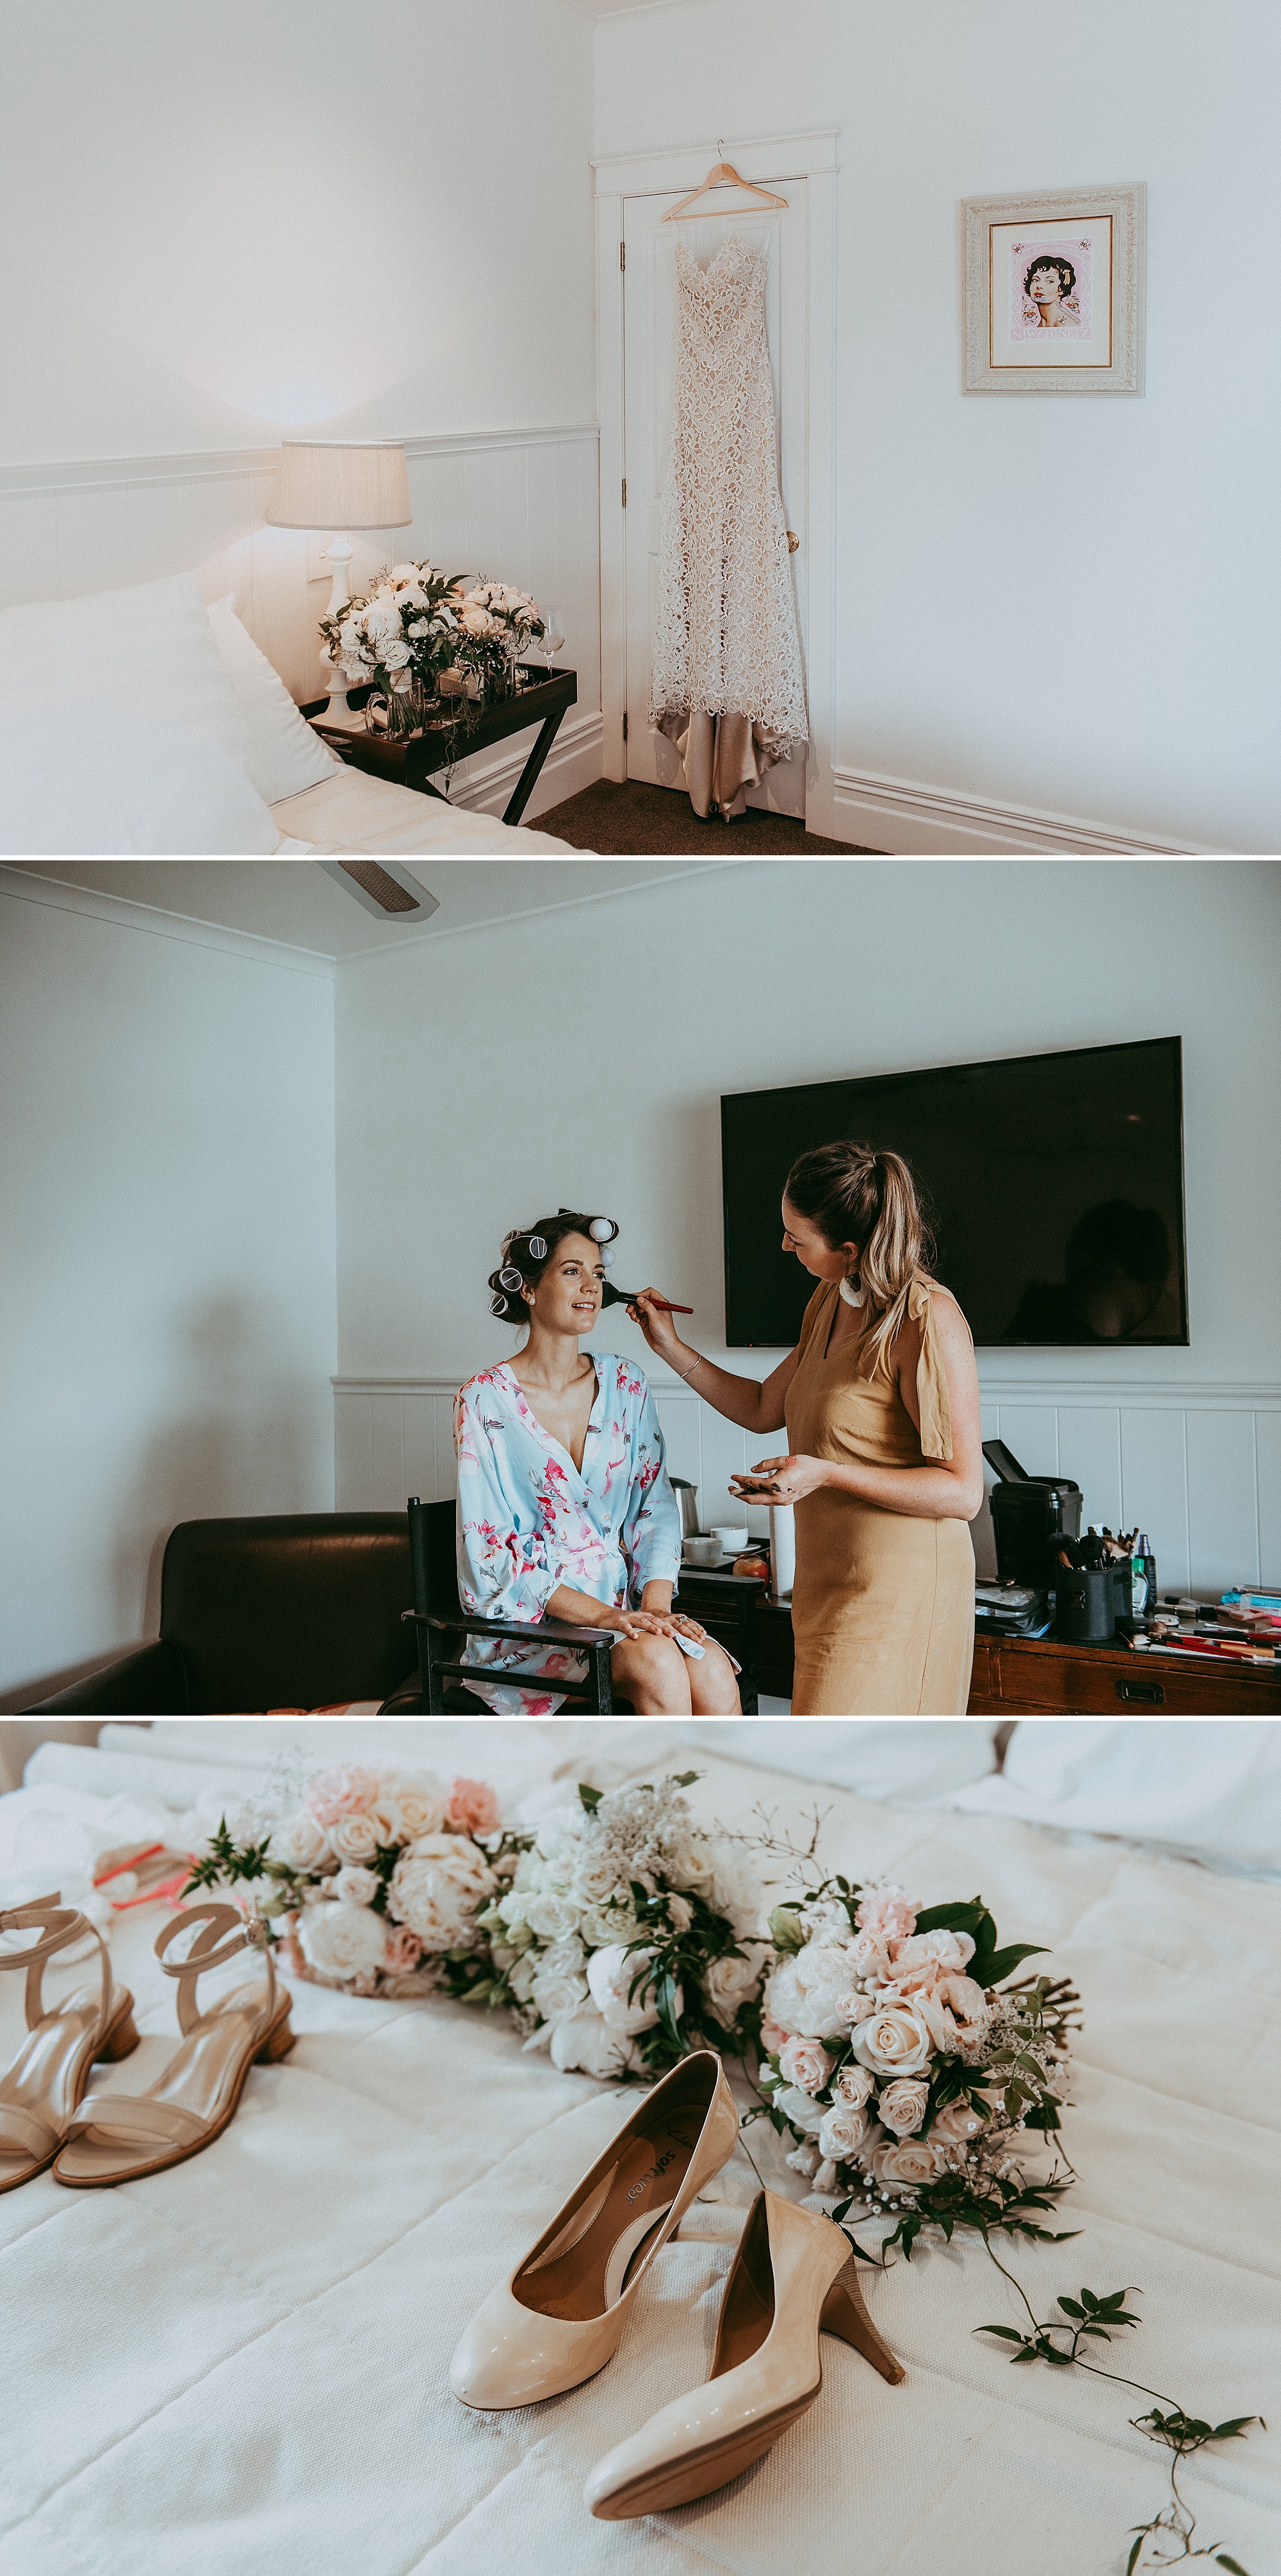 2017,Andrew and Lucy,Copthorne,Hair?,MUA_ Sammie,Melissa and Mike's wedding,Paihia,Paradise flowers,Russell,The Duke,